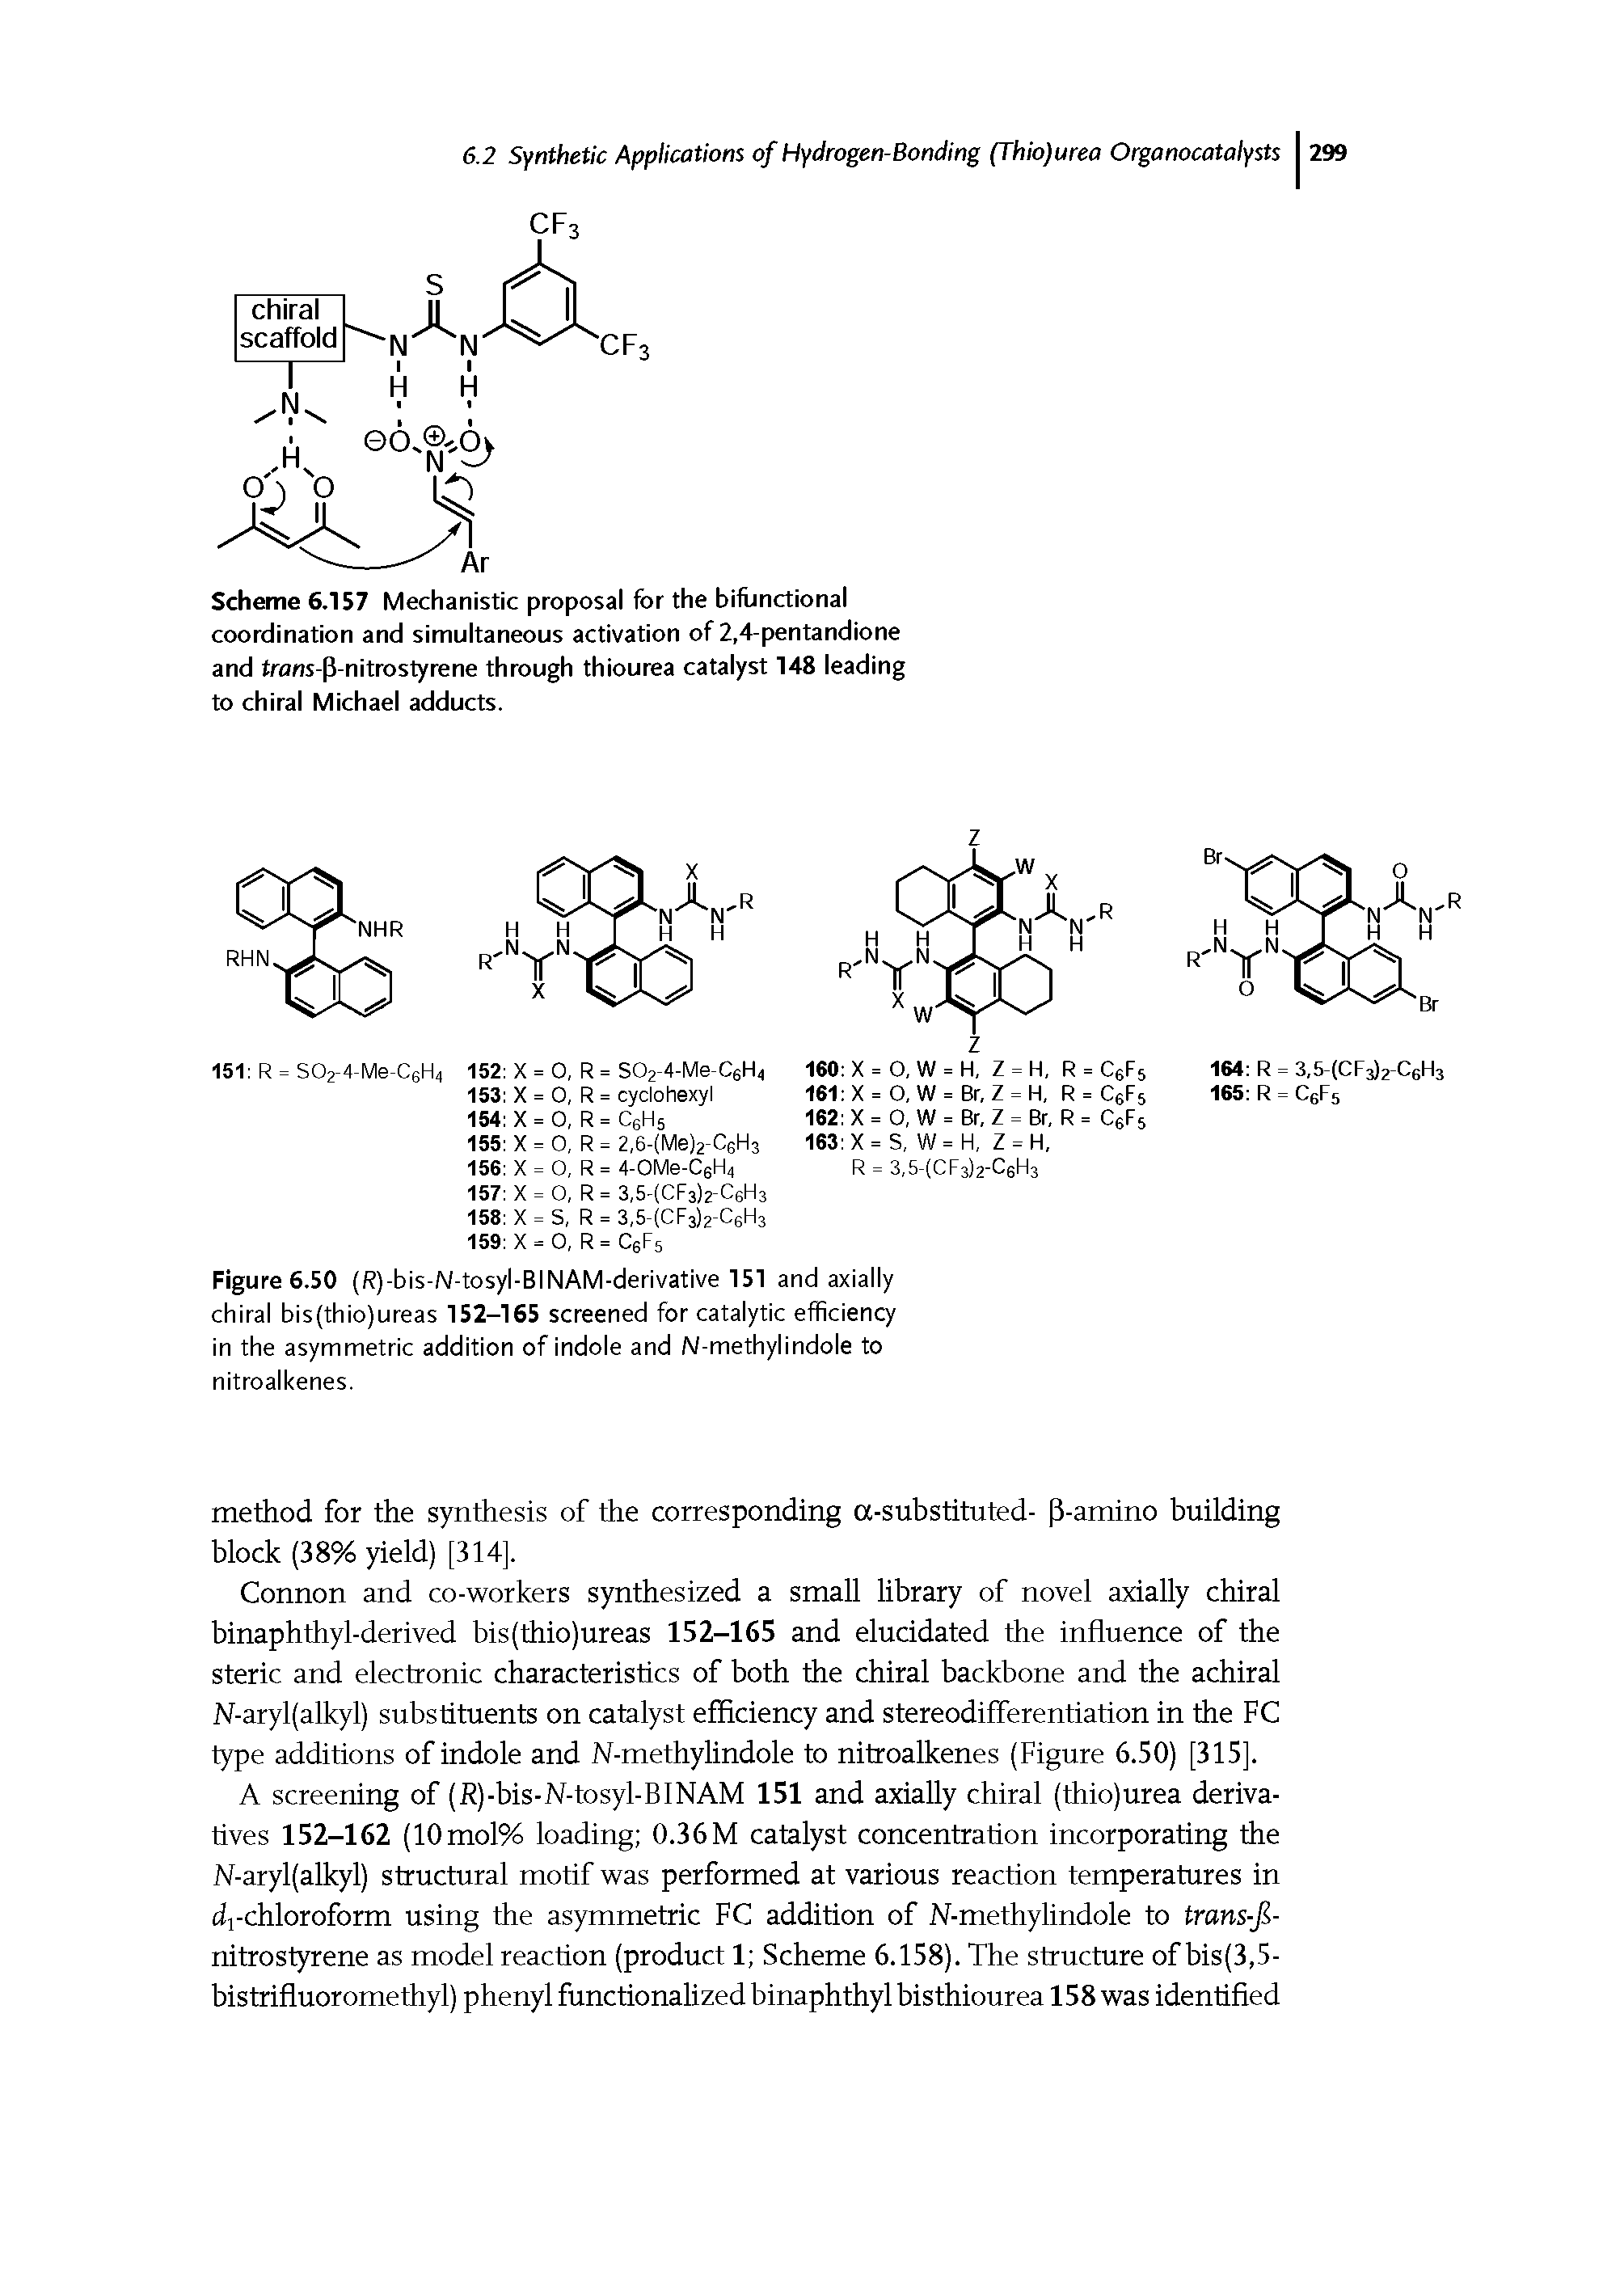 Scheme 6.157 Mechanistic proposal for the biflinctional coordination and simultaneous activation of 2,4-pentandione and trans-P-nitrostyrene through thiourea catalyst 148 leading to chiral Michael adducts.